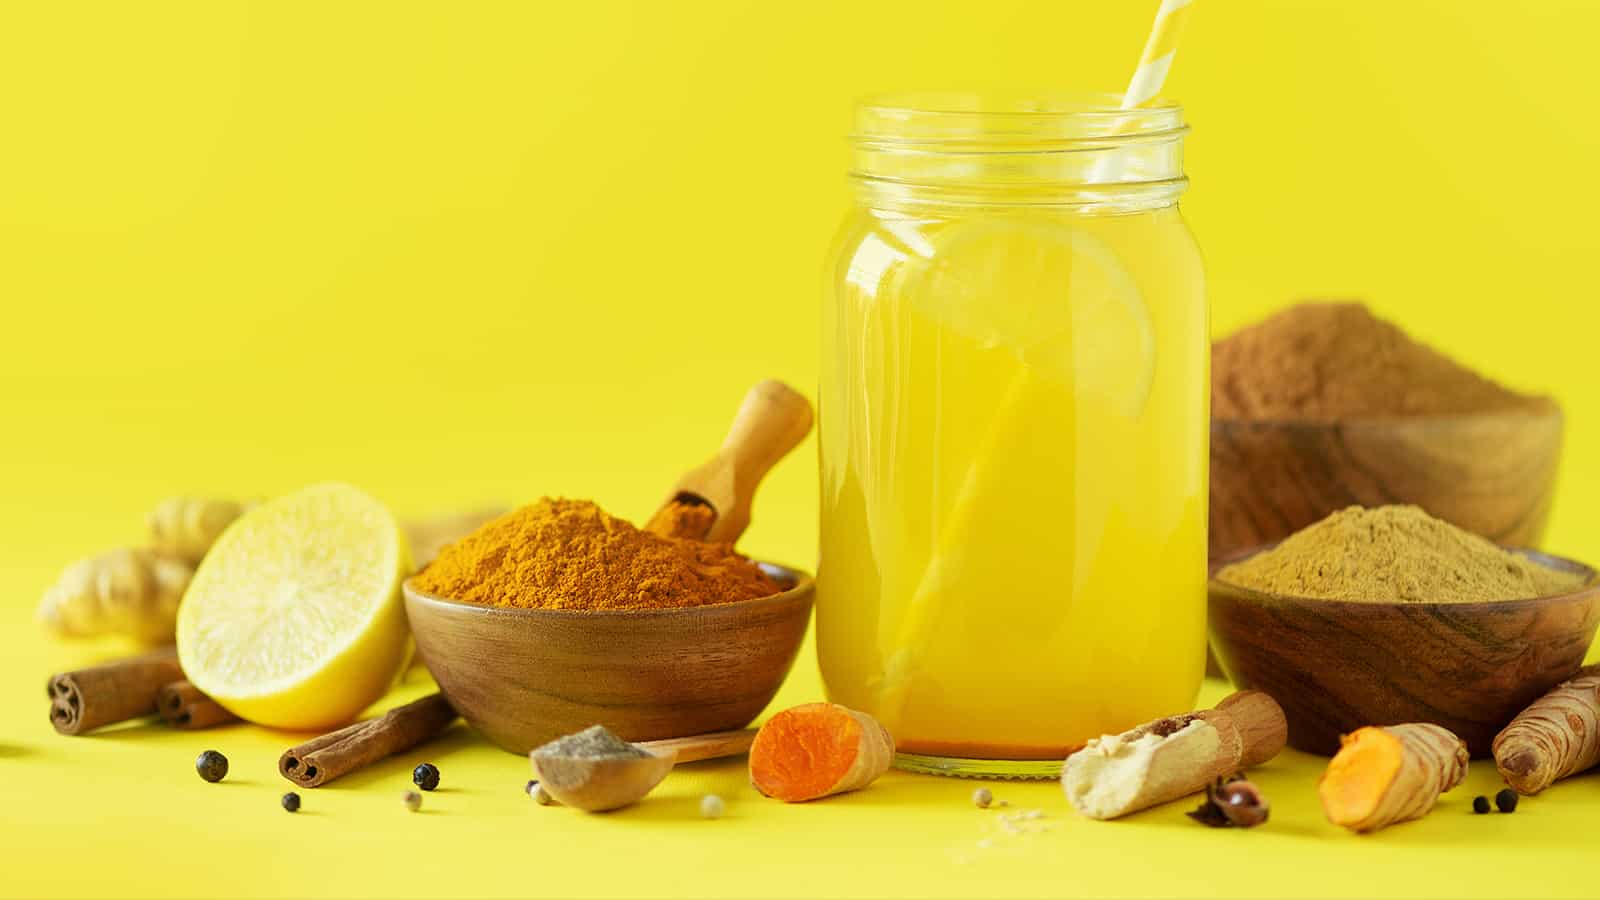 How to Make Turmeric Lemonade to Relieve Depression and ...